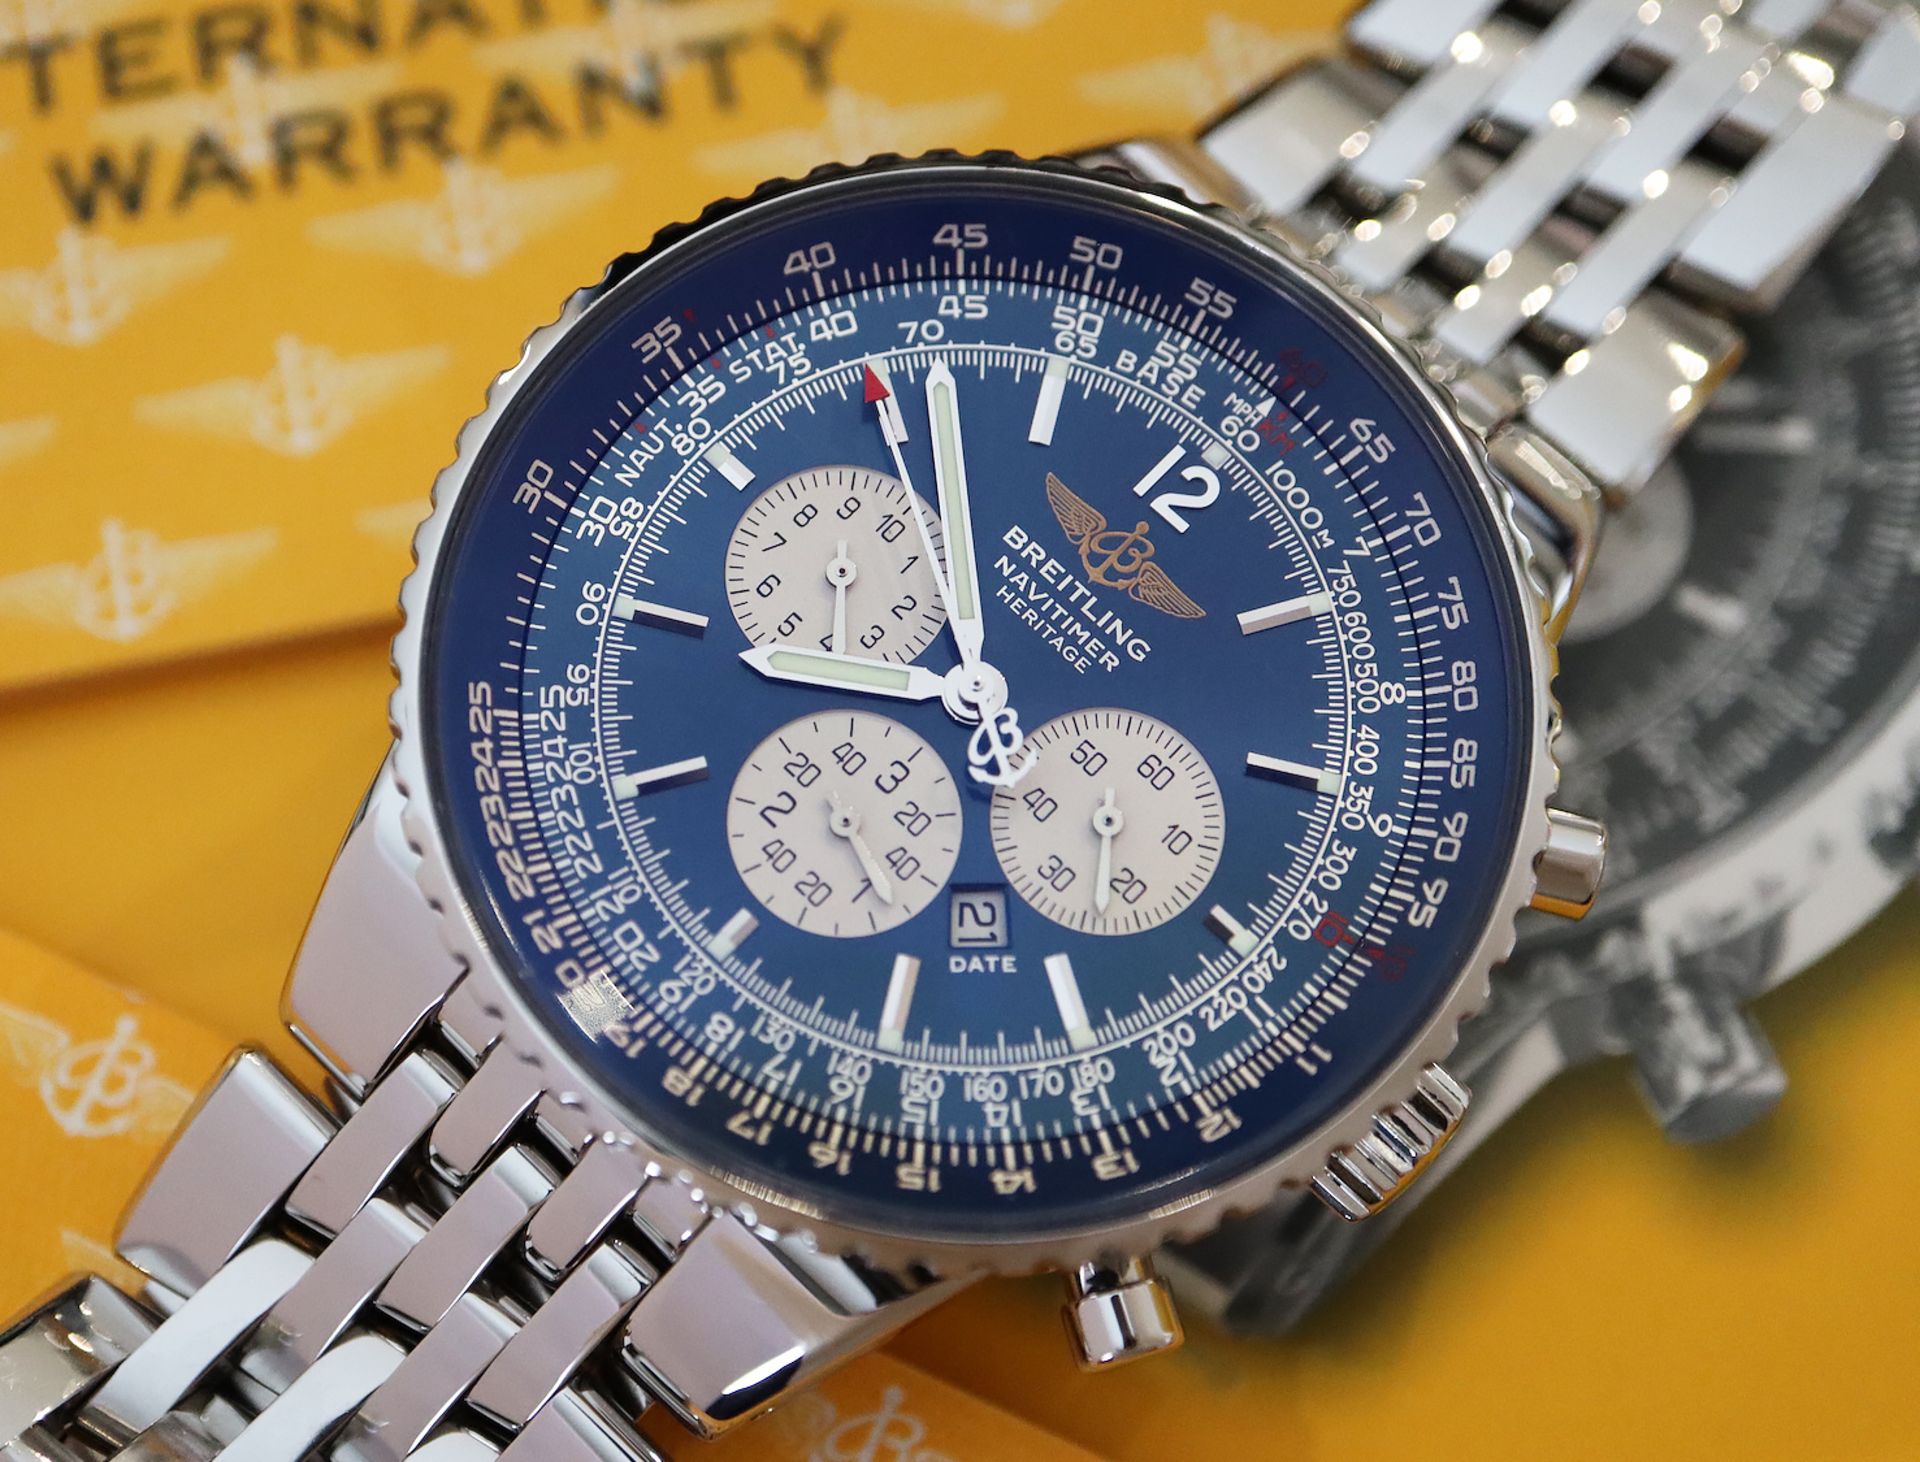 BREITLING NAVITIMER HERITAGE CHRONOGRAPH (REF. A35350) 'FULL SET - BOX, CERTS. ETC.' NAVY DIAL - Image 3 of 16